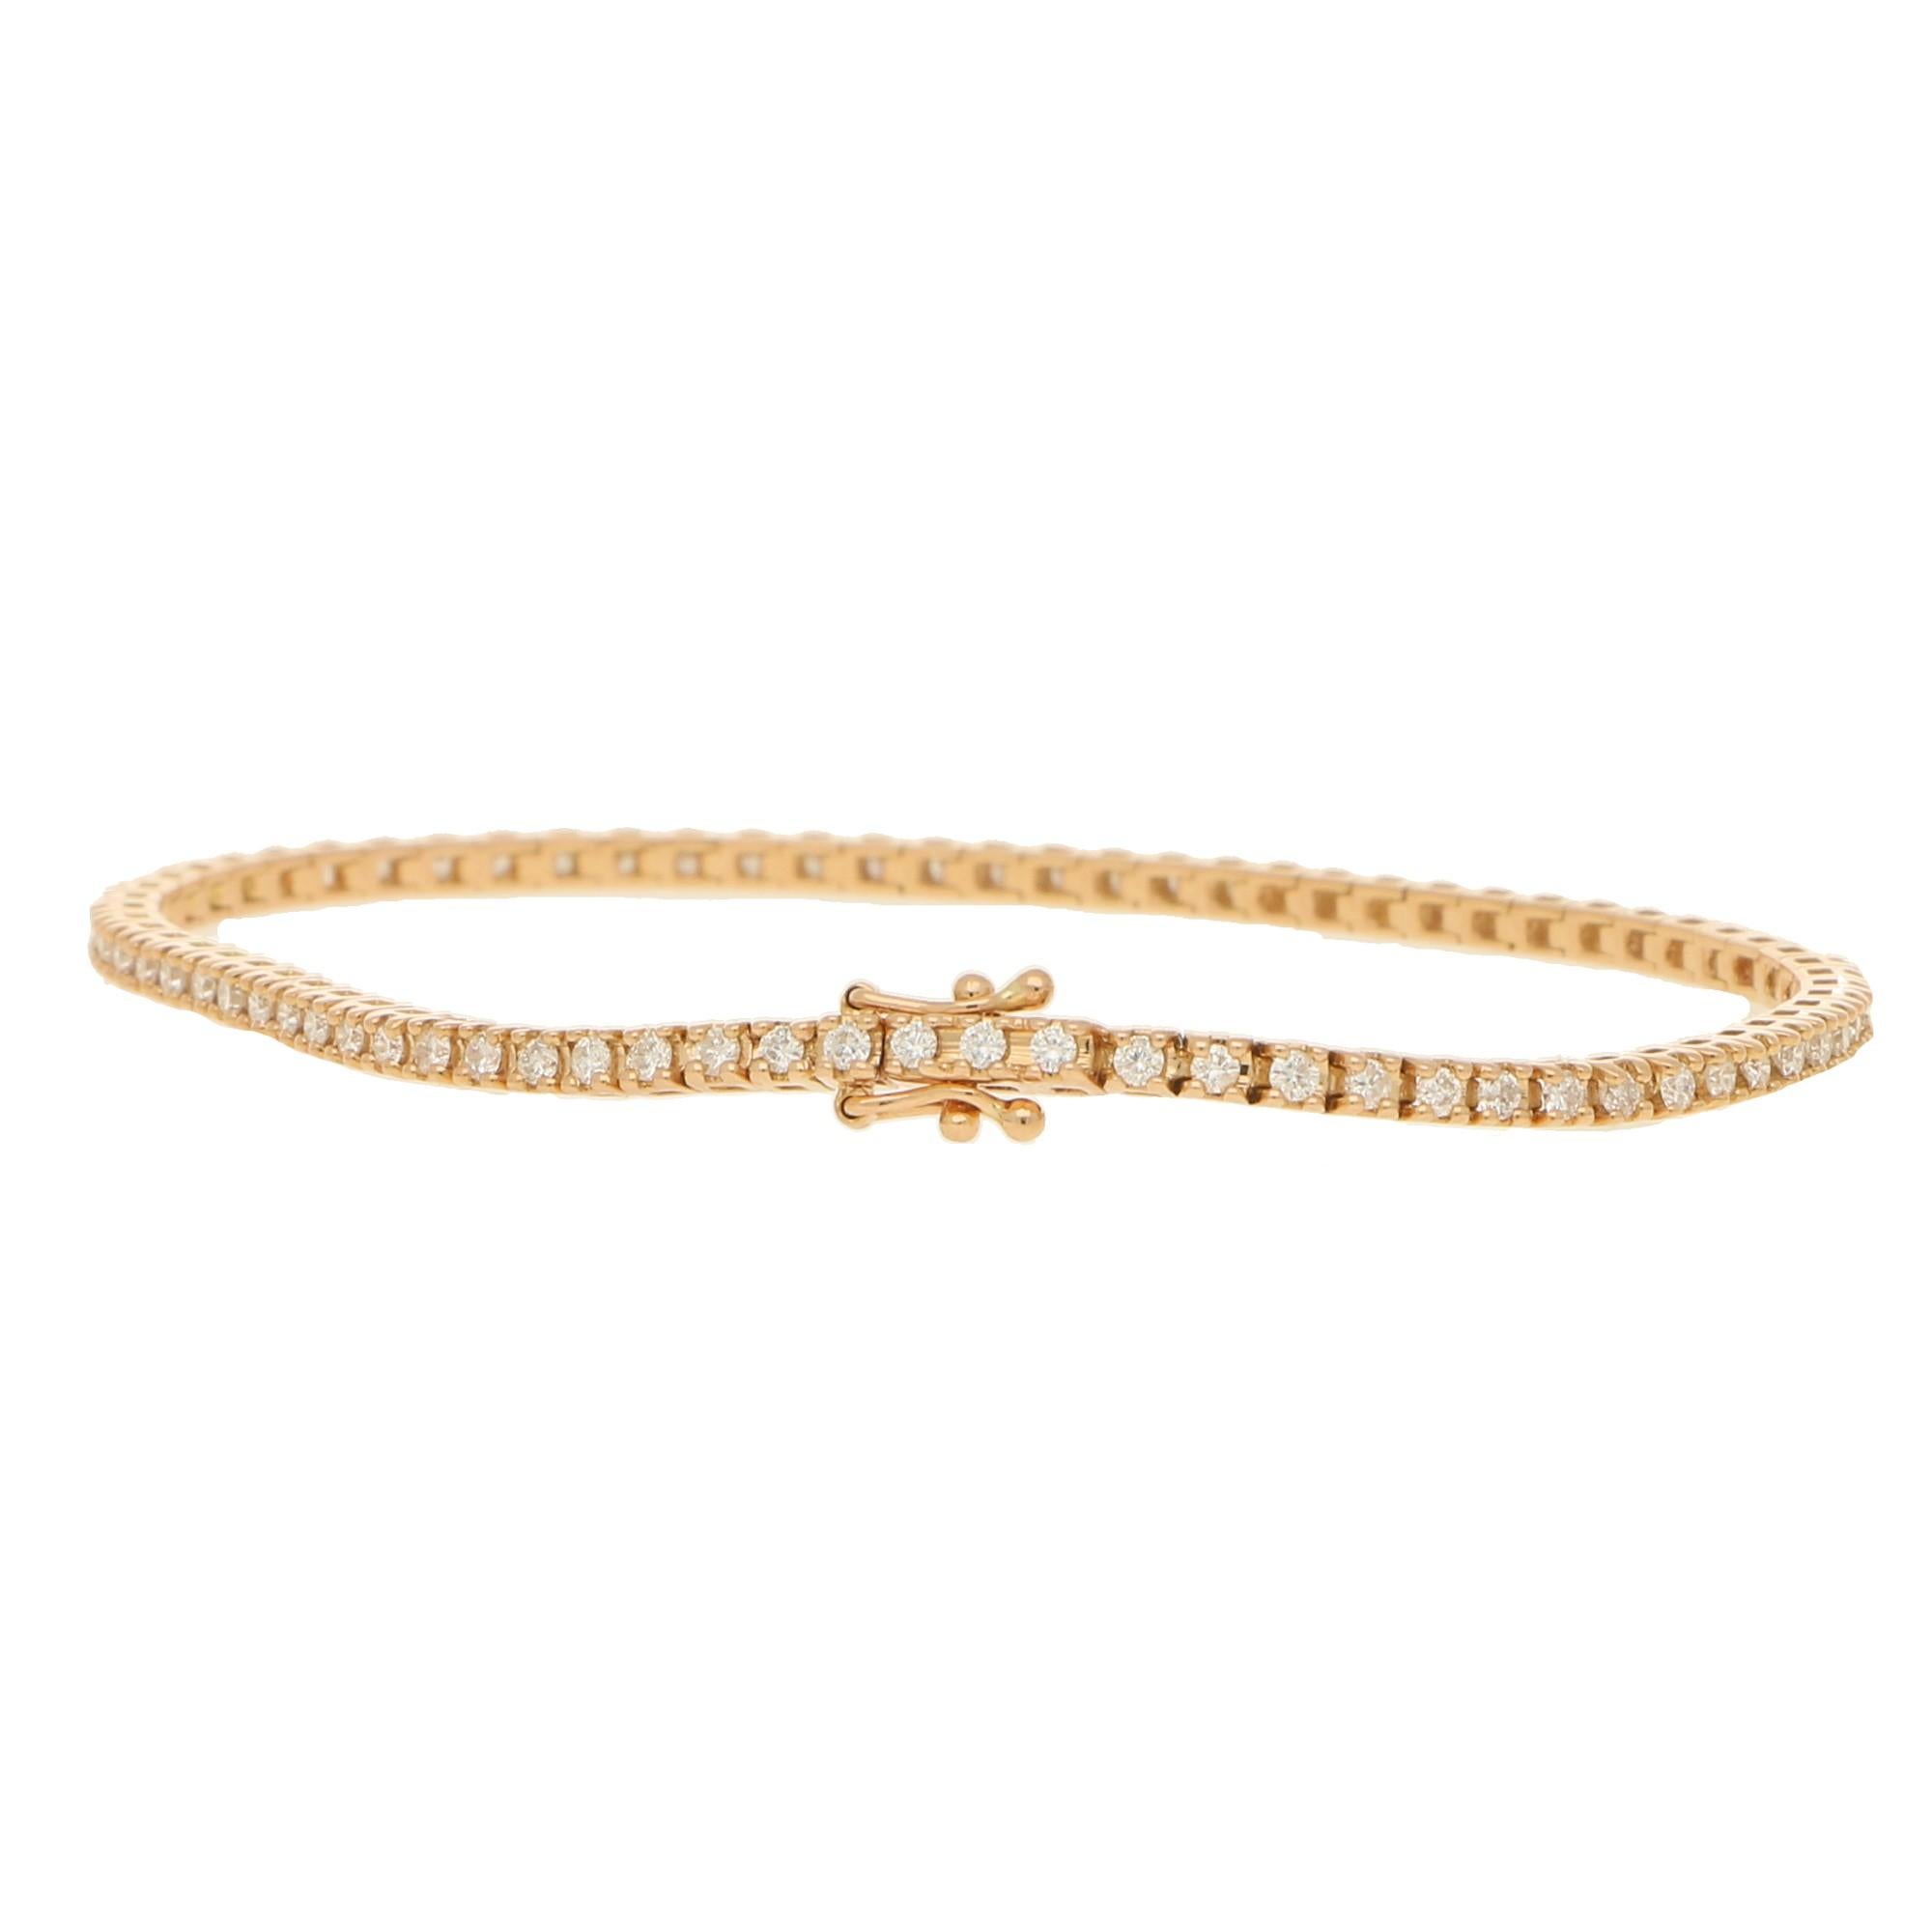 A classic diamond line bracelet set in 18k rose gold.

The bracelet is composed of exactly 75 round brilliant cut diamonds which are all seamlessly set in articulated claw settings. This particular design is a firm favourite as it can be worn for a